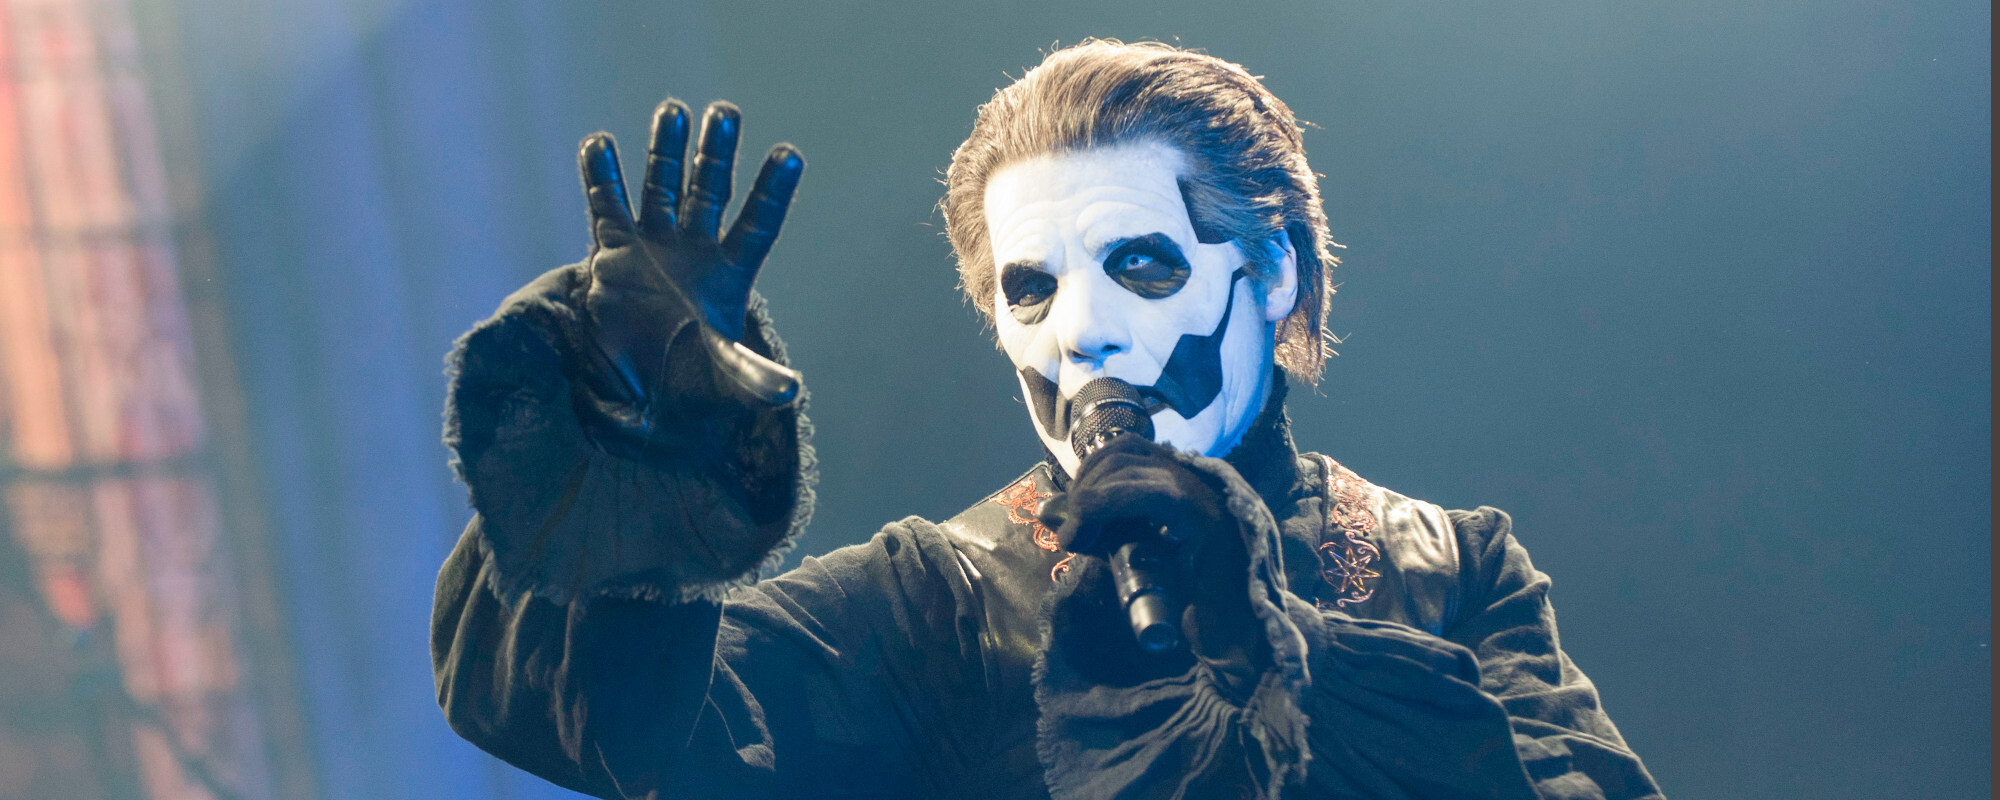 Ghost frontman Tobias Forge on the band's 5th album, songwriting